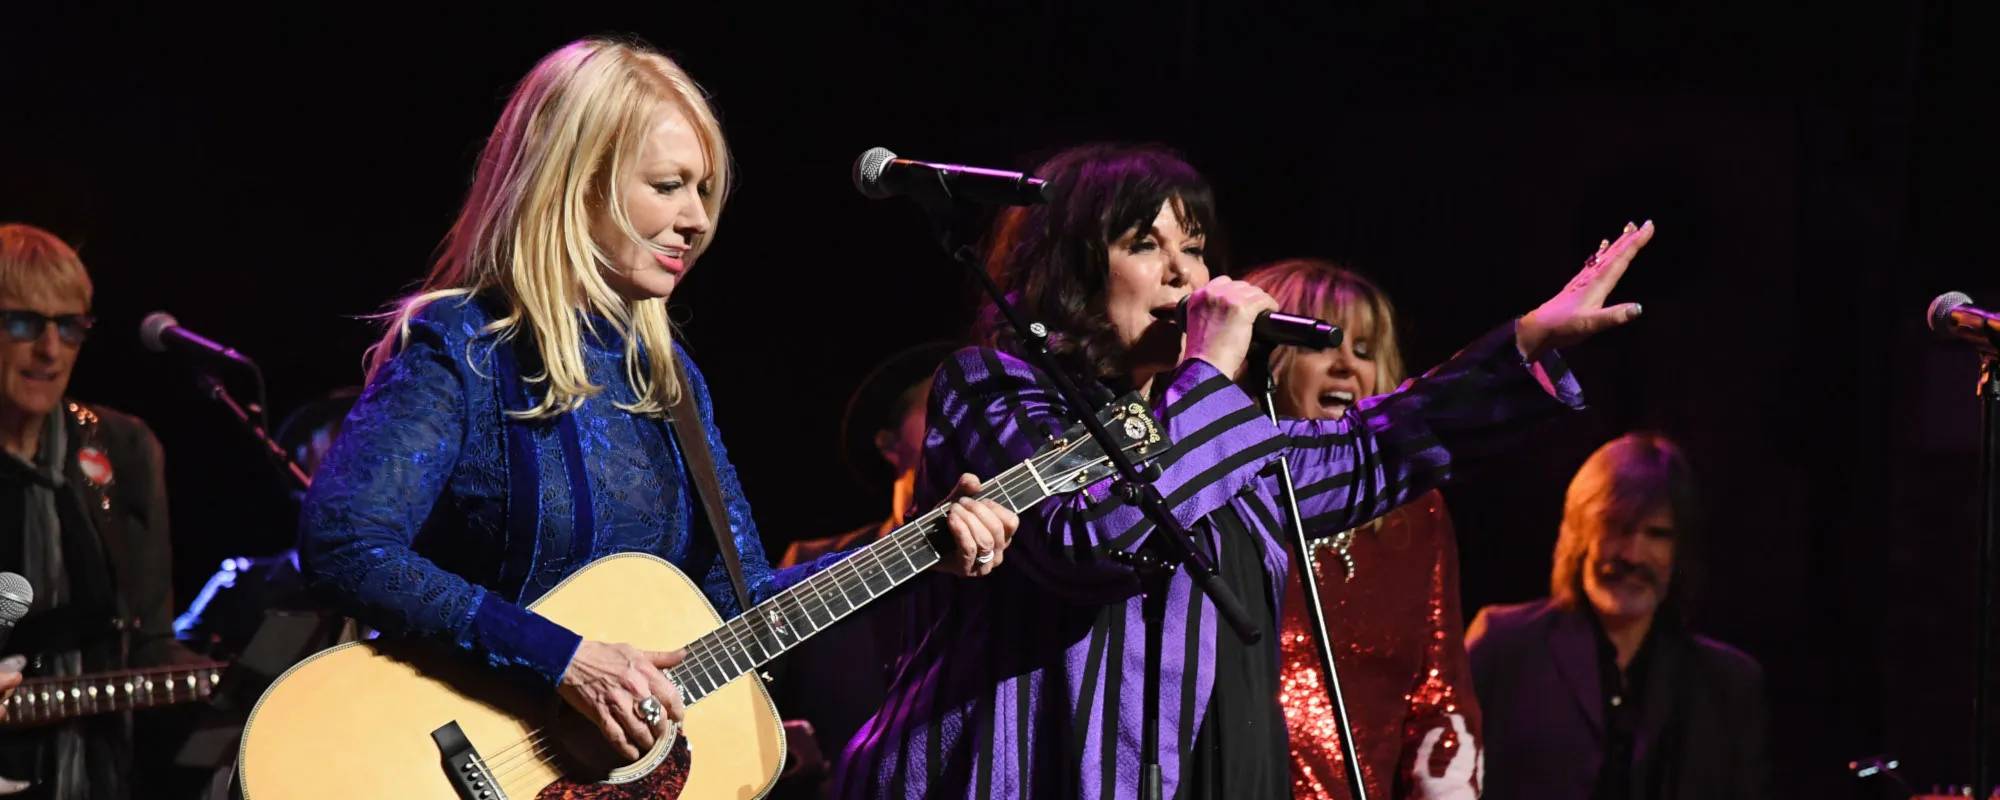 Heart’s Wilson Sisters Reunite Onstage at Ann Wilson’s Concert Tuesday in California